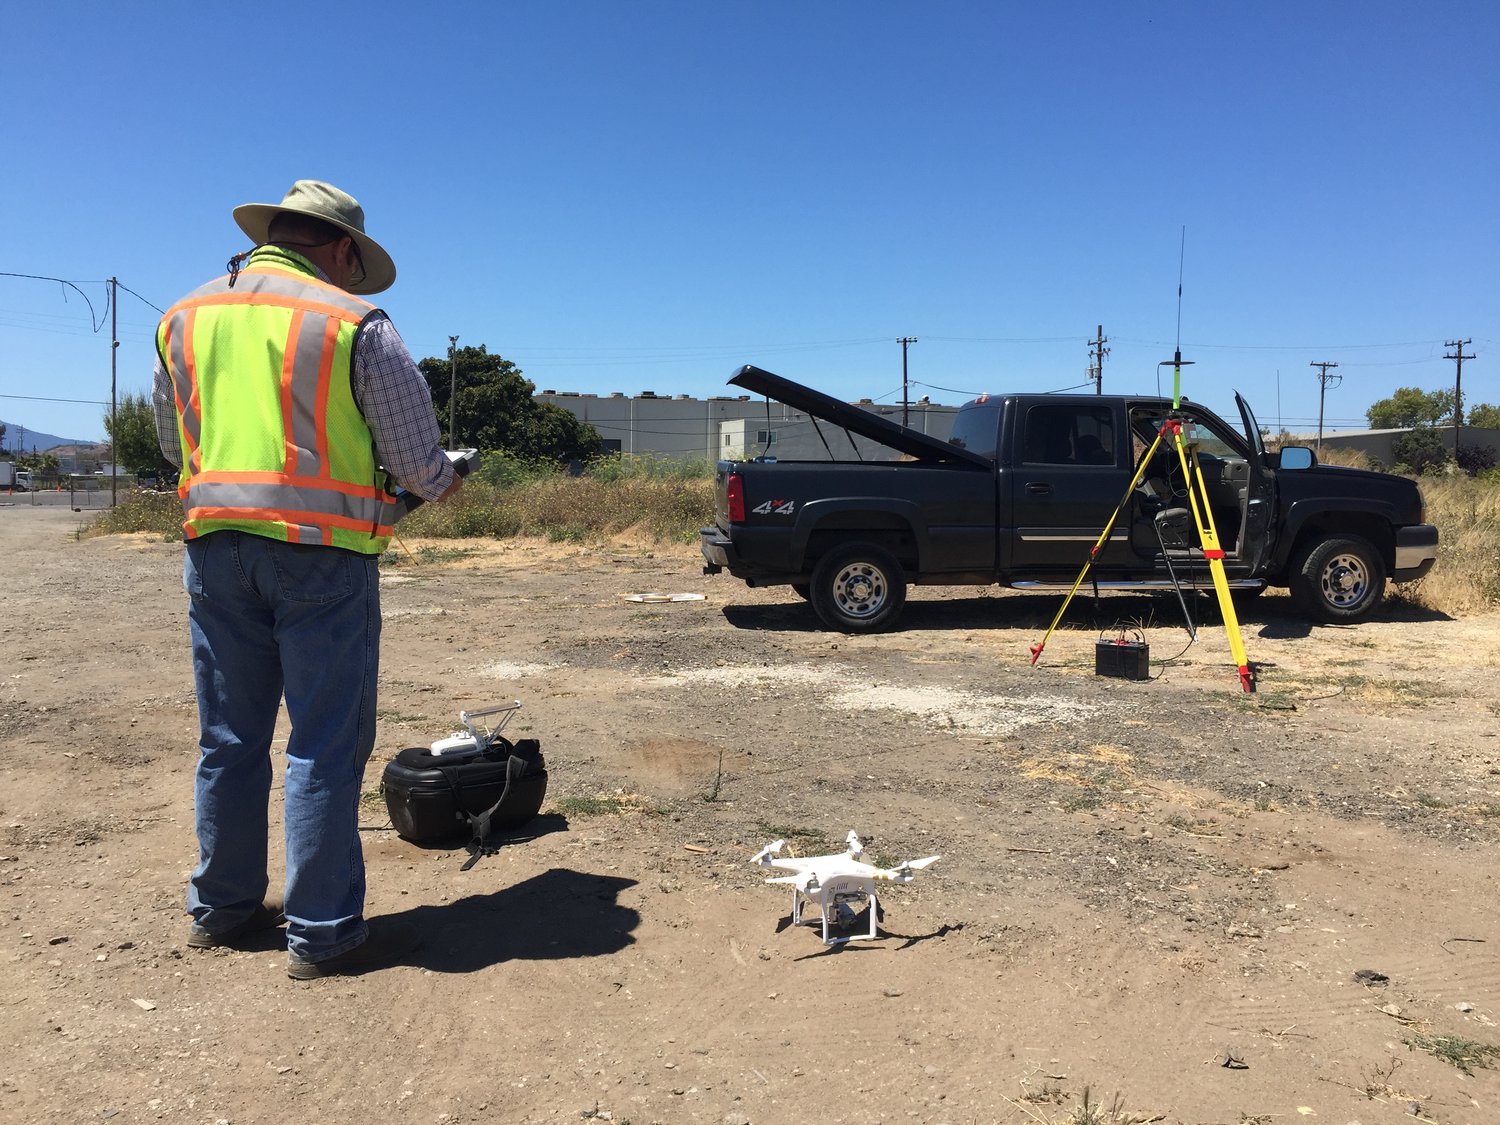 4 Steps to Becoming a Professional Drone Data